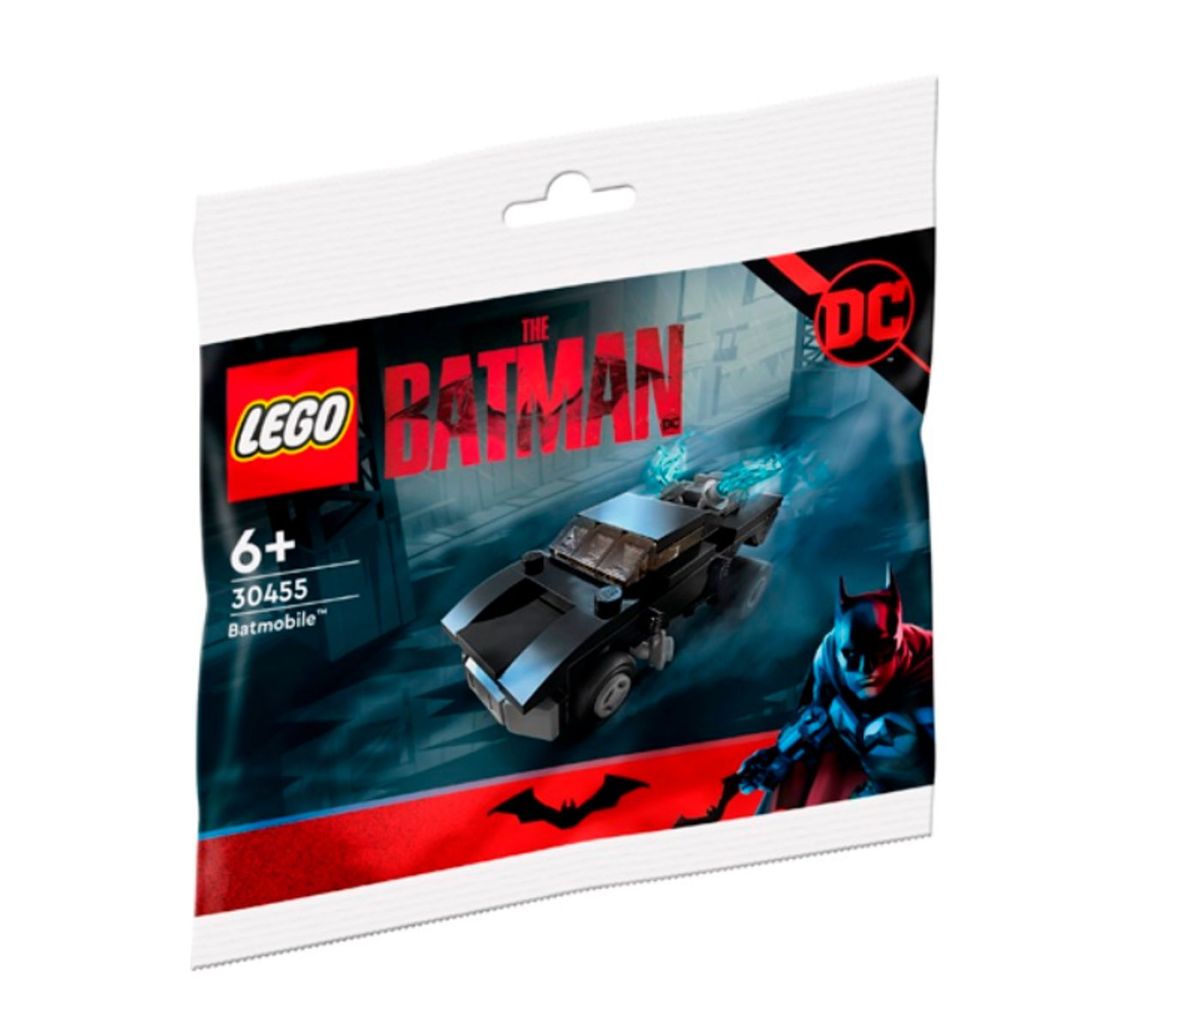 More 2022 LEGO Polybag Images Surface